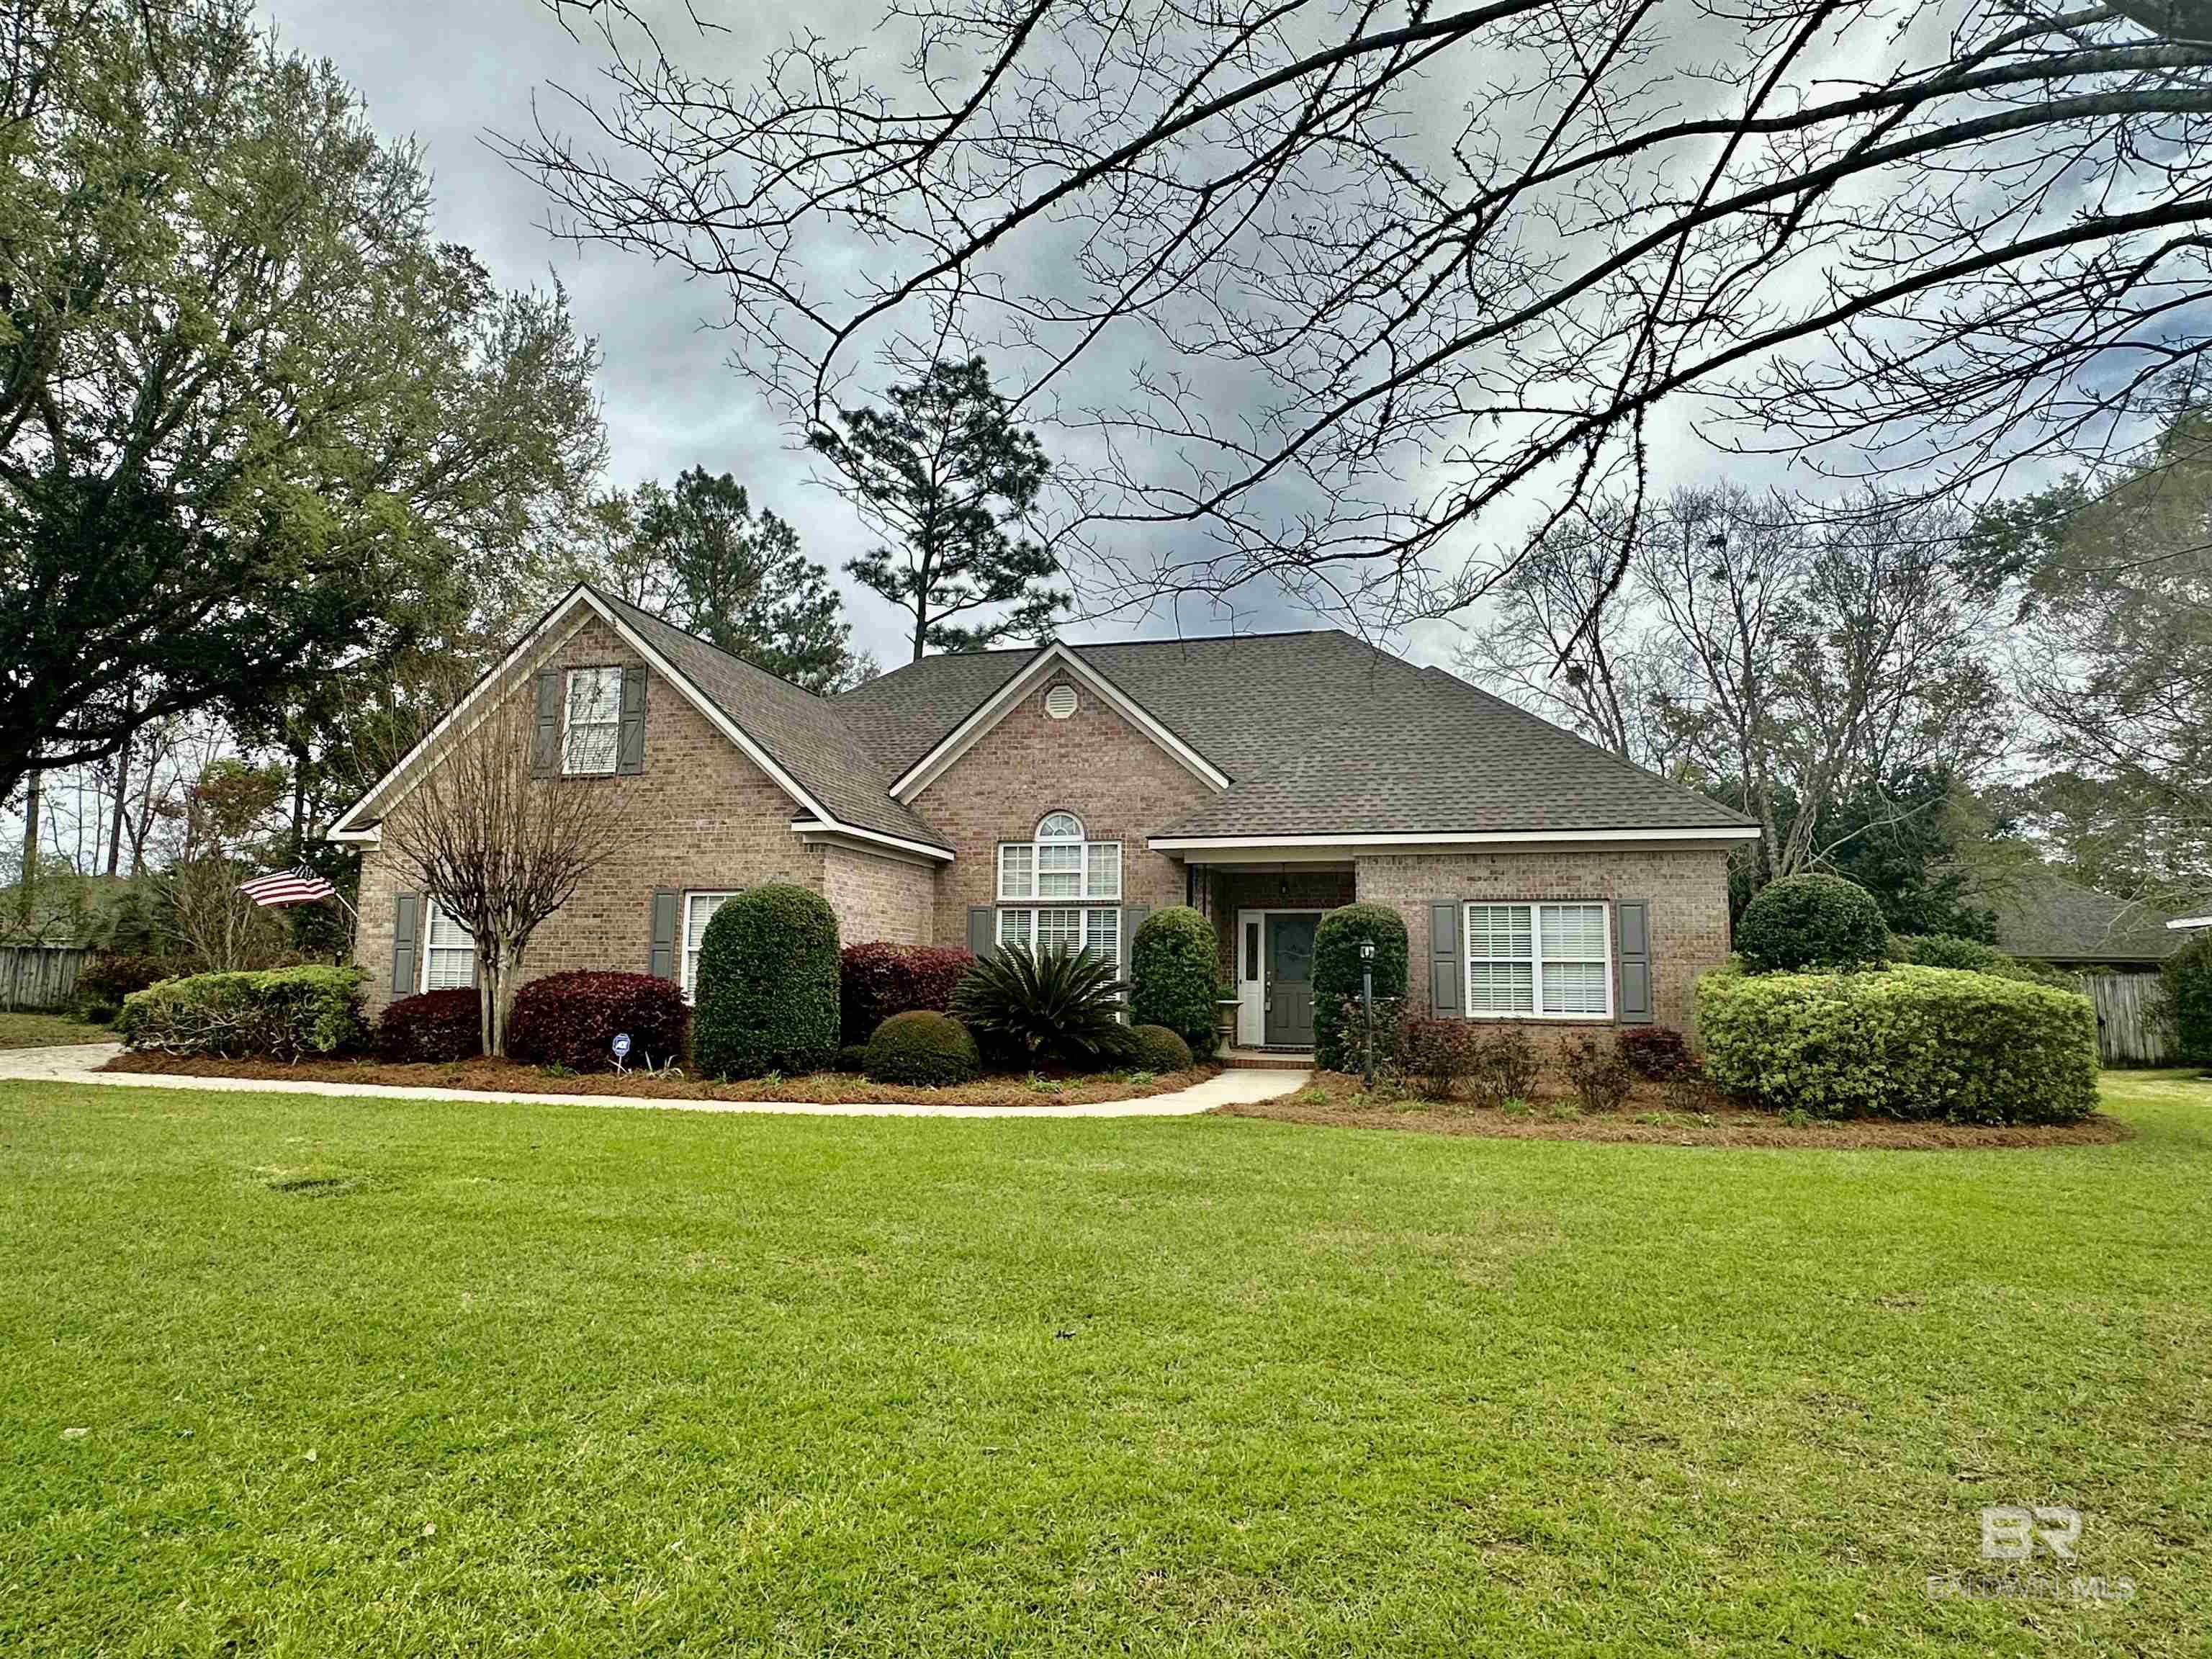 Sehoy Beauty, Daphne Alabama! This custom brick home sits on a quiet cul-de-sac. It has Curb Appeal galore, Custom Landscaping, 2019 New roof, new paint, power-washed and is ready for YOU! It even has a Bonus surprise! The Formal Dining room opens to the Great room with high Vaulted ceilings & features a Corner Gas Fireplace. The large granite kitchen has abundant counters, cabinets with great storage, a separate pantry and breakfast bar. Kitchen overflows to Keeping Room/Breakfast Area with great natural lighting and window views. It is a split floorplan: total of 4 Bedrooms: 3 bedrooms are on Main Level, 1 bedroom is up. 3 bathrooms; 1 bath is up. The Master enSuite is located just off the breakfast room and is a world of its own. Features Trey Ceilings, Double Windows, Walk in Closets, Double Sinks, Separate Shower, Custom WALK-IN Jetted Tub, and Linen Closet. All bedrooms are carpeted. Now for the Bonus: a fabulous Slate Floored Sunroom that is over 180 extra sq feet & is included in sq. footage. It is heated and cooled by 2024 LG Window Unit System with Remote. Step outside to Entertaining Patios, a custom Pavillon for 2, Fenced Yard with lush landscaping. More features to appreciate are clean gutters, 2 car side-entry garage with extra storage space, sprinkler system, oversized driveway and much more. It is meticulously kept and waiting for you. Shown by Appt.